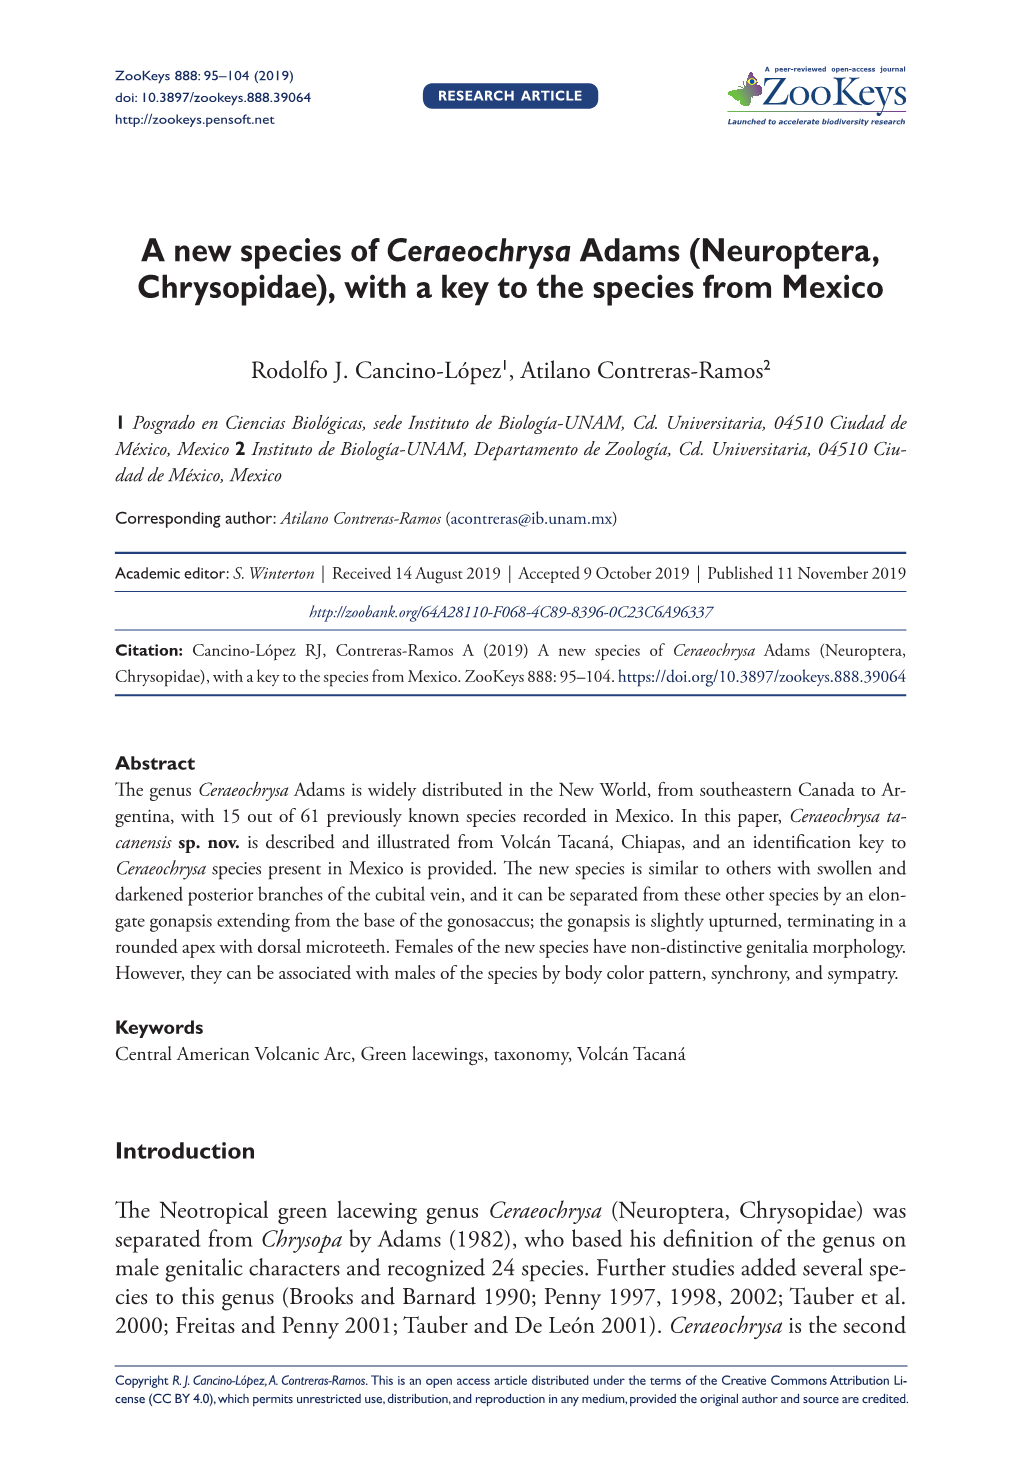 A New Species of Ceraeochrysa Adams (Neuroptera, Chrysopidae), with a Key to the Species from Mexico